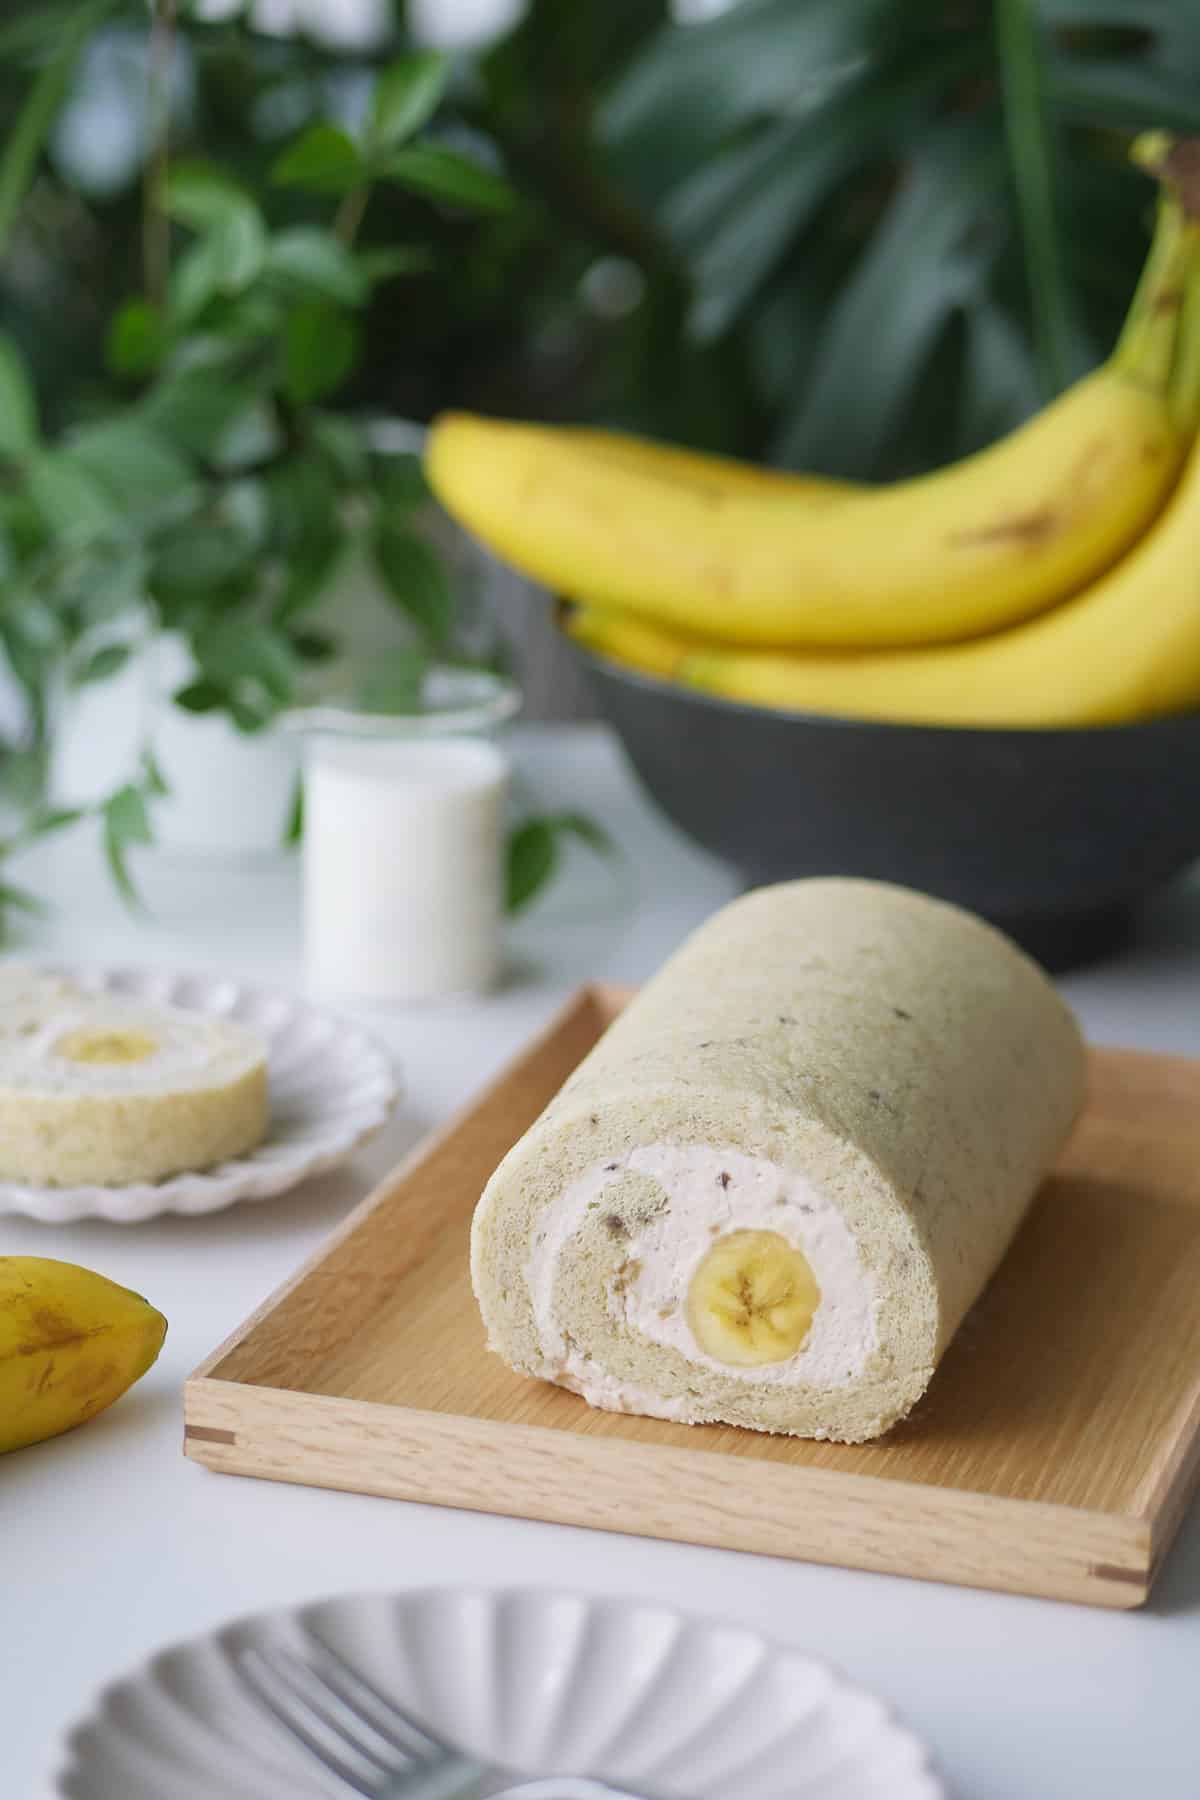 A close up view of a banana cake roll with a piece cut out revealing the cross section of a whole banana inside the roll. 